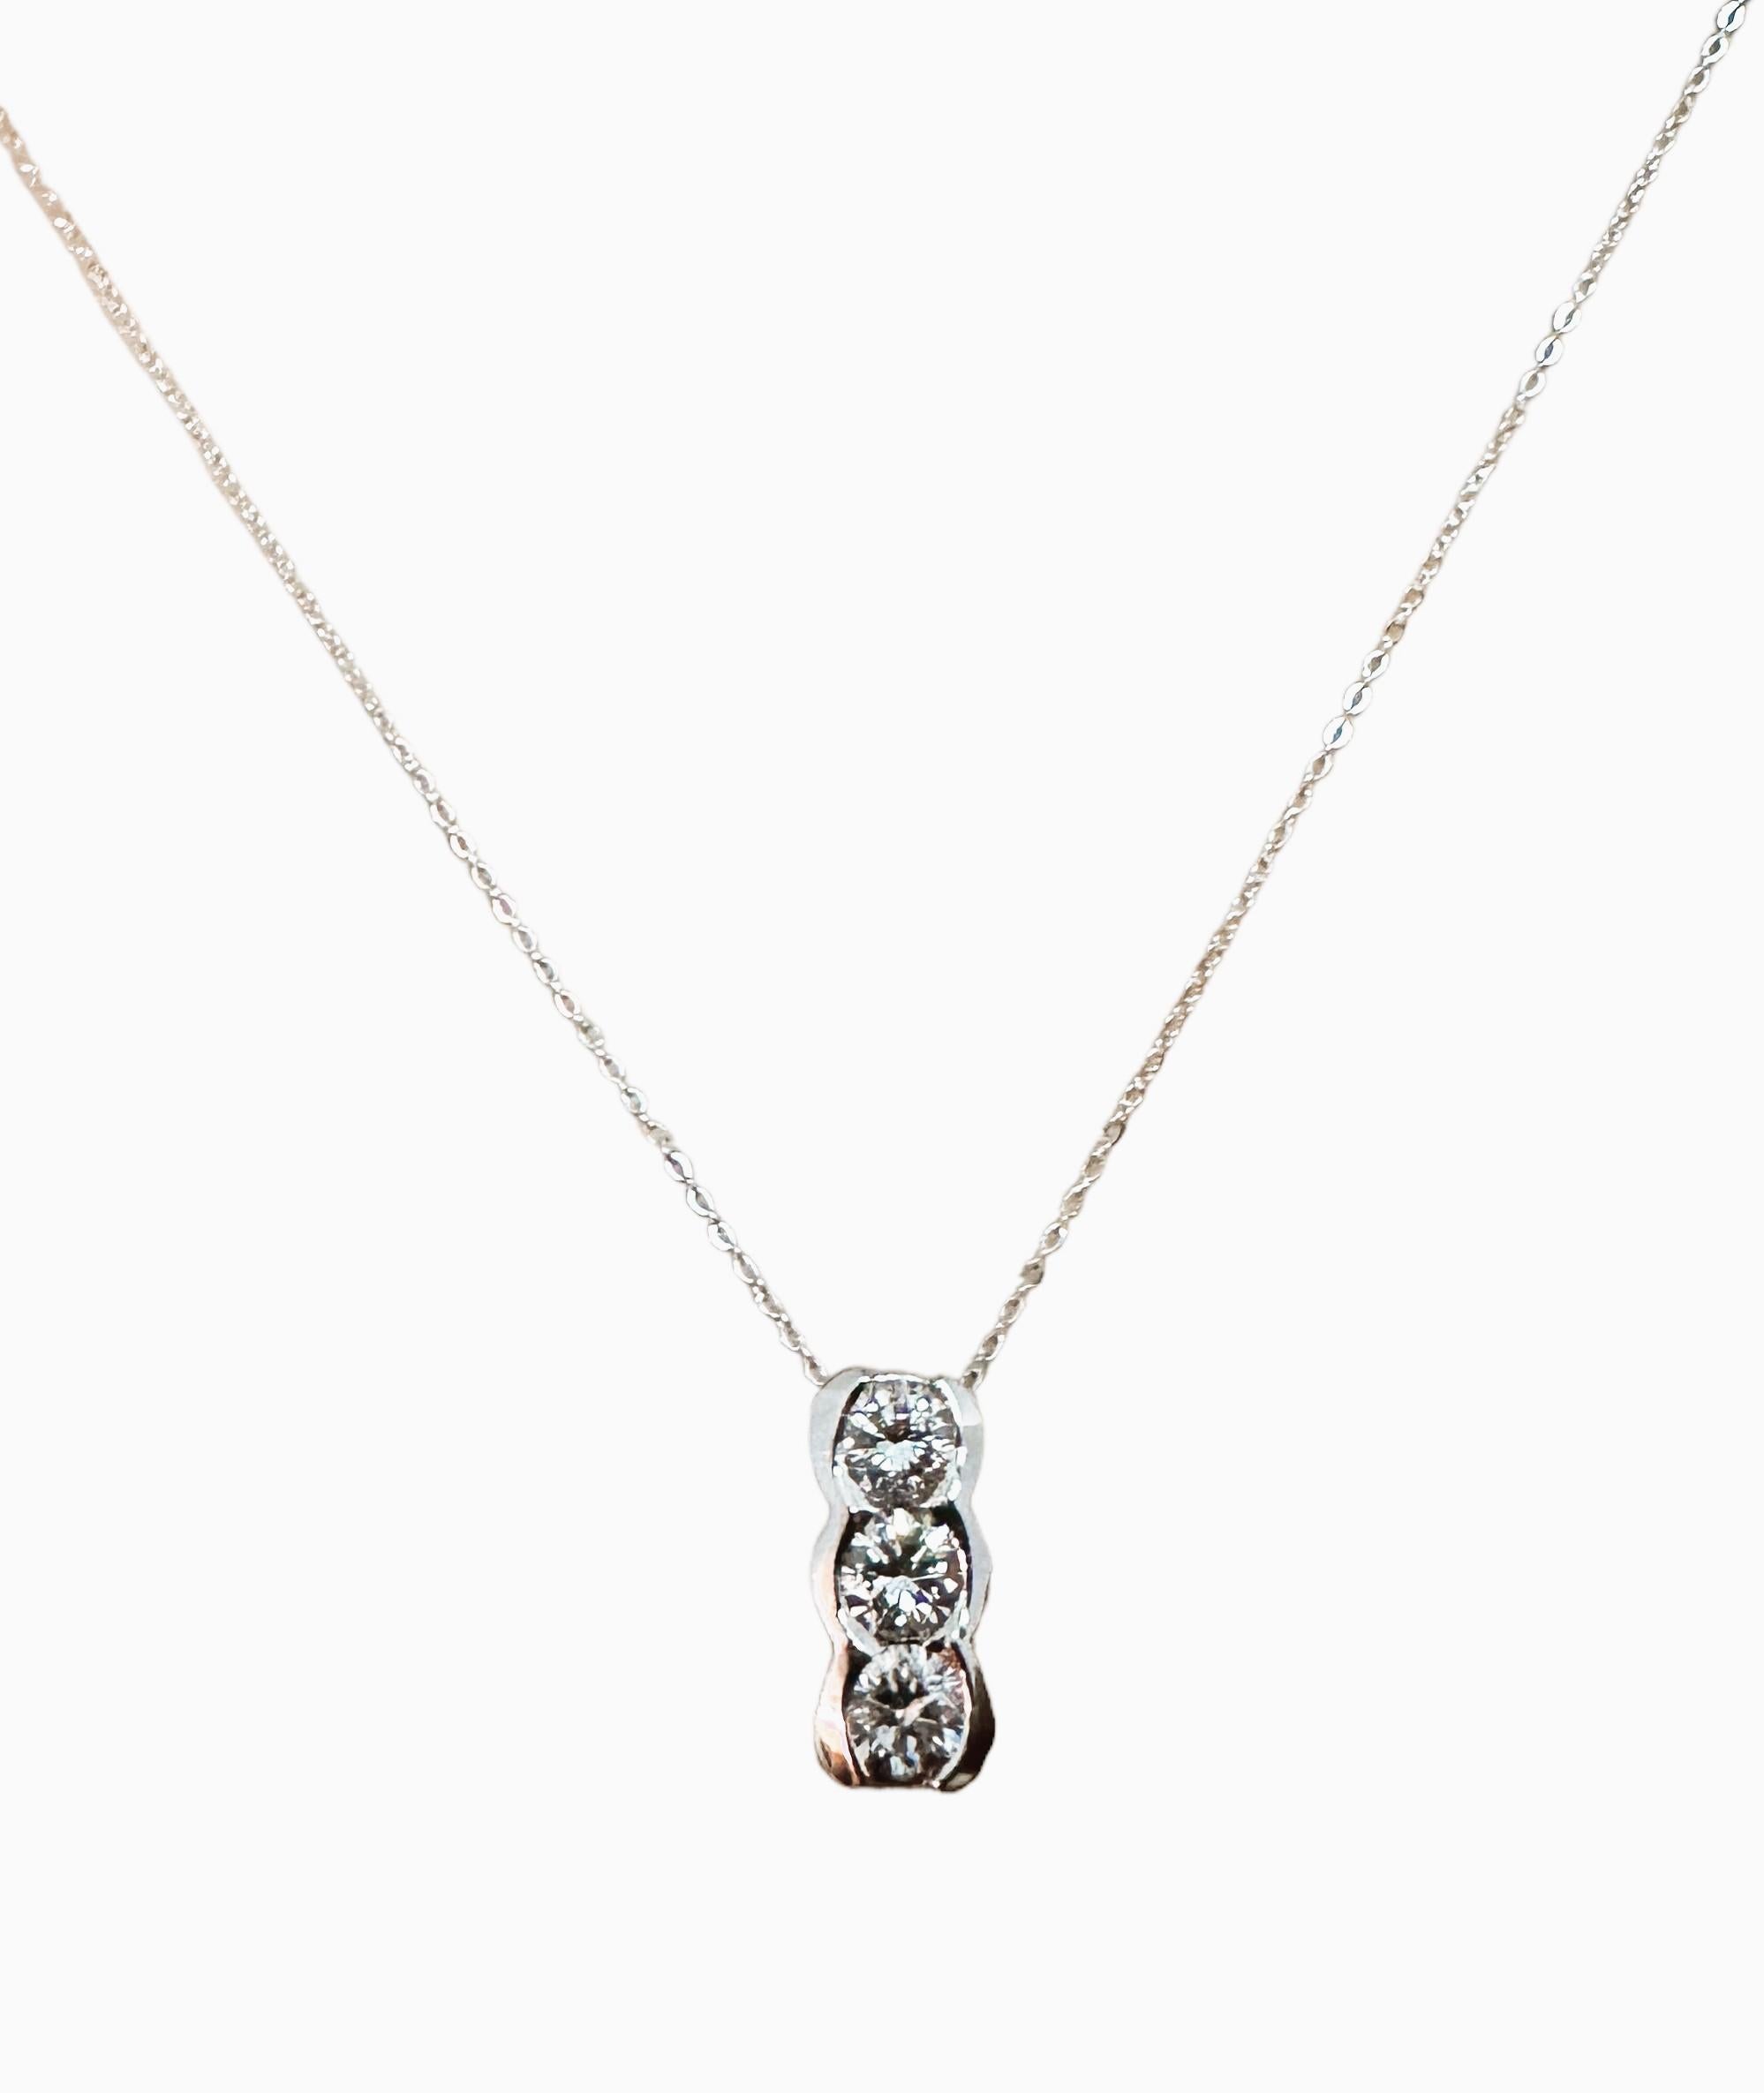 Brilliant Cut Italian Modern 14k White Gold 3-Stone .5 ct Diamond Necklace with Appraisal For Sale